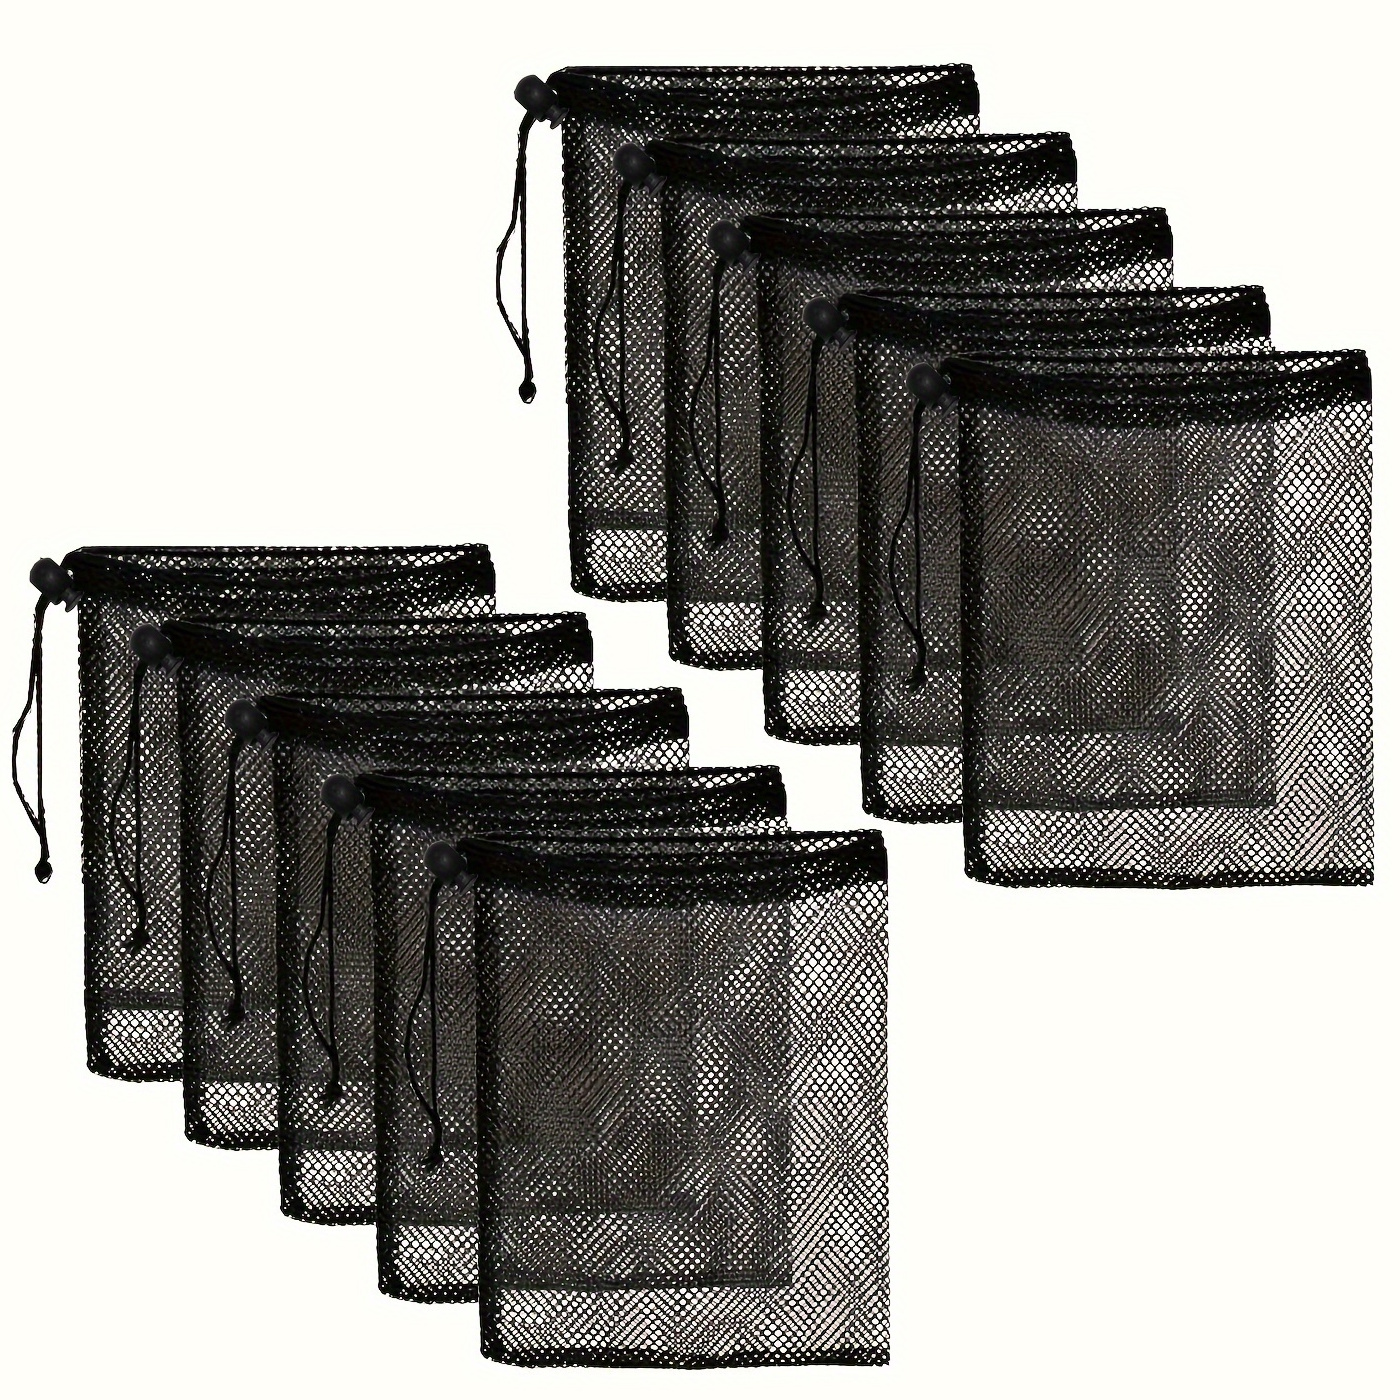 

10-pack Multipurpose Nylon Drawstring Mesh Bags For Storage And Organization In Bedroom, Bathroom, And Desk - Versatile Fabric Hanging Shelf For Various Room Types With Alternative Mounting